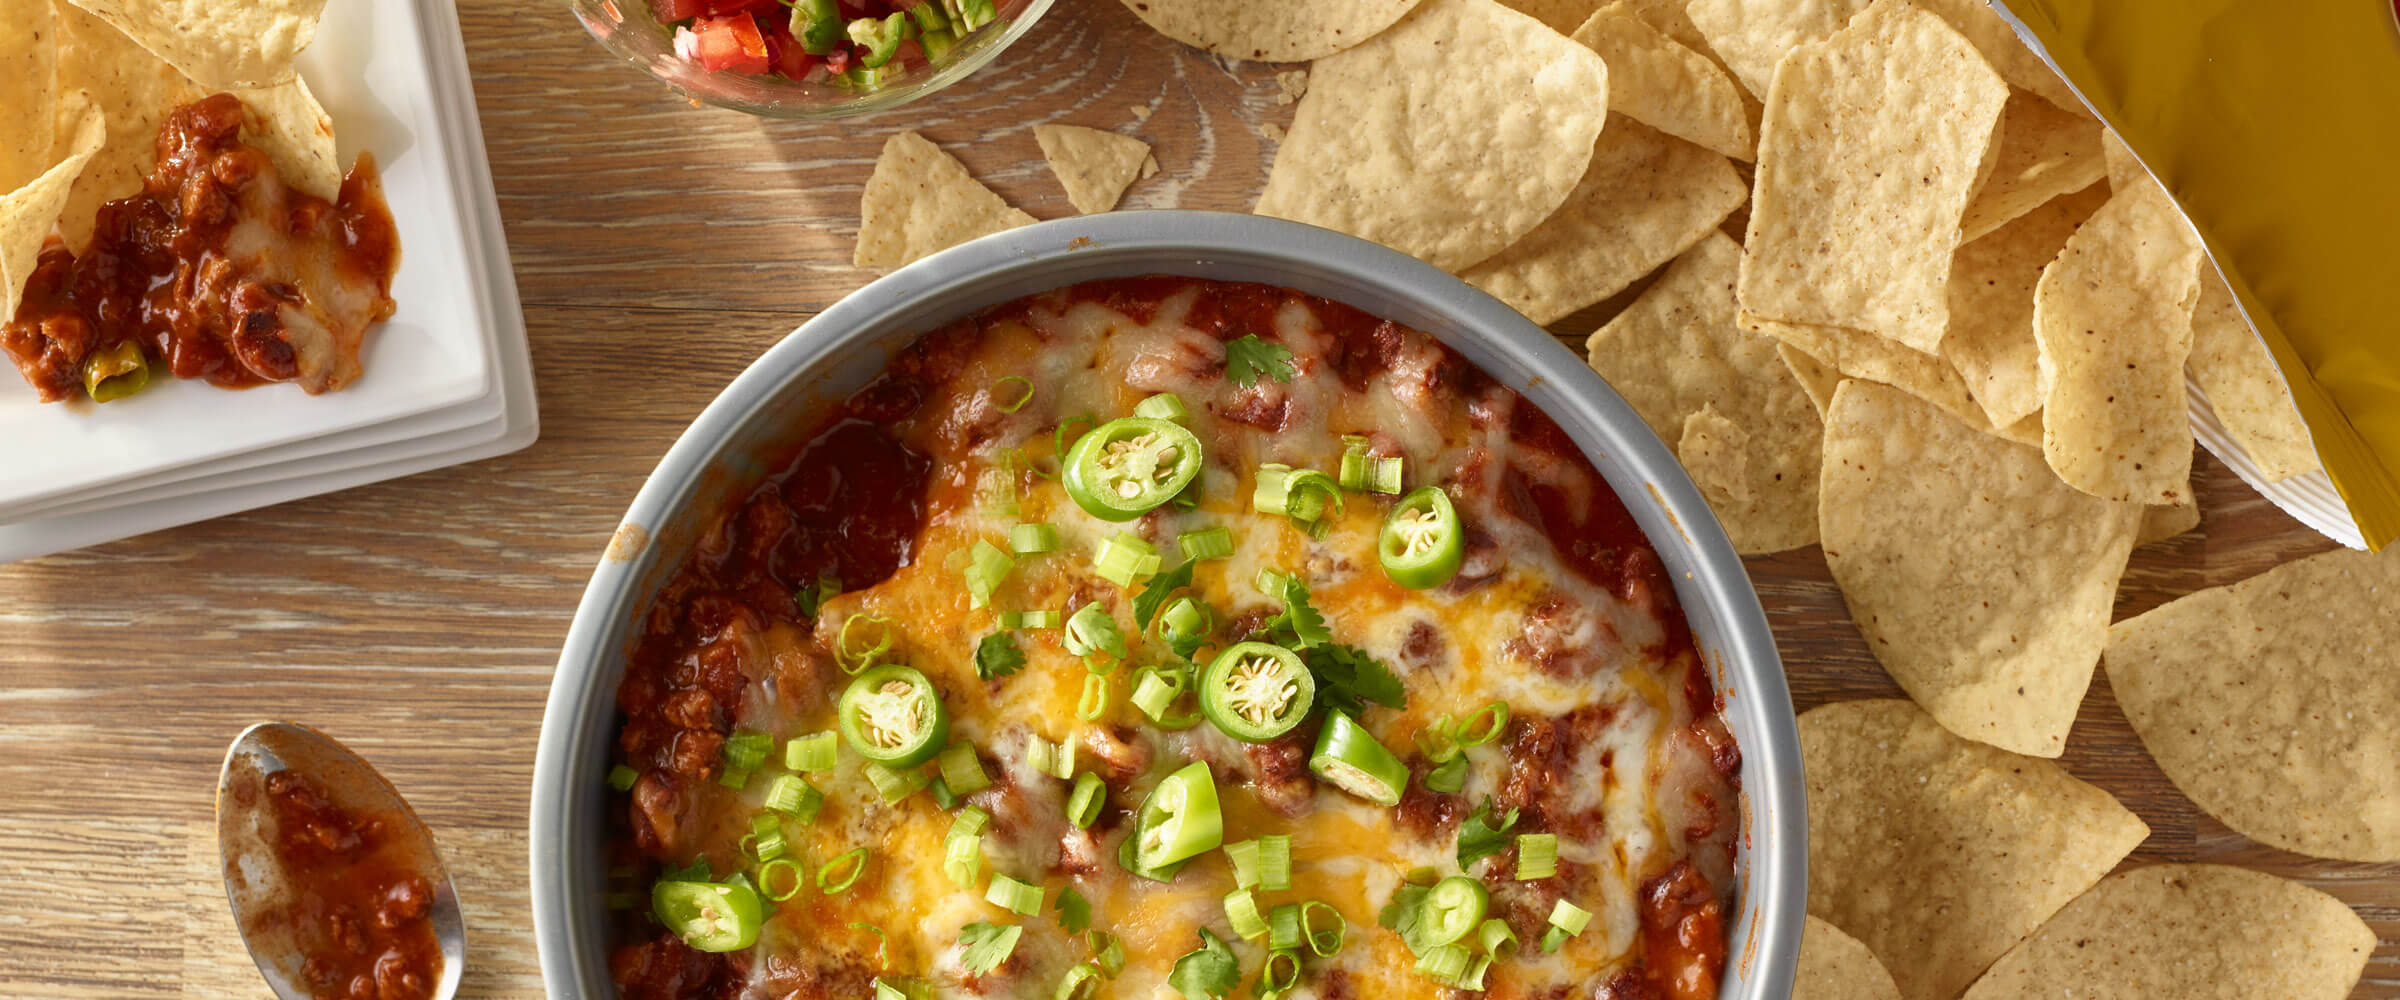 Easy Chili Cheesy Dip in gray bowl topped with jalapenos and green onions with chips on side